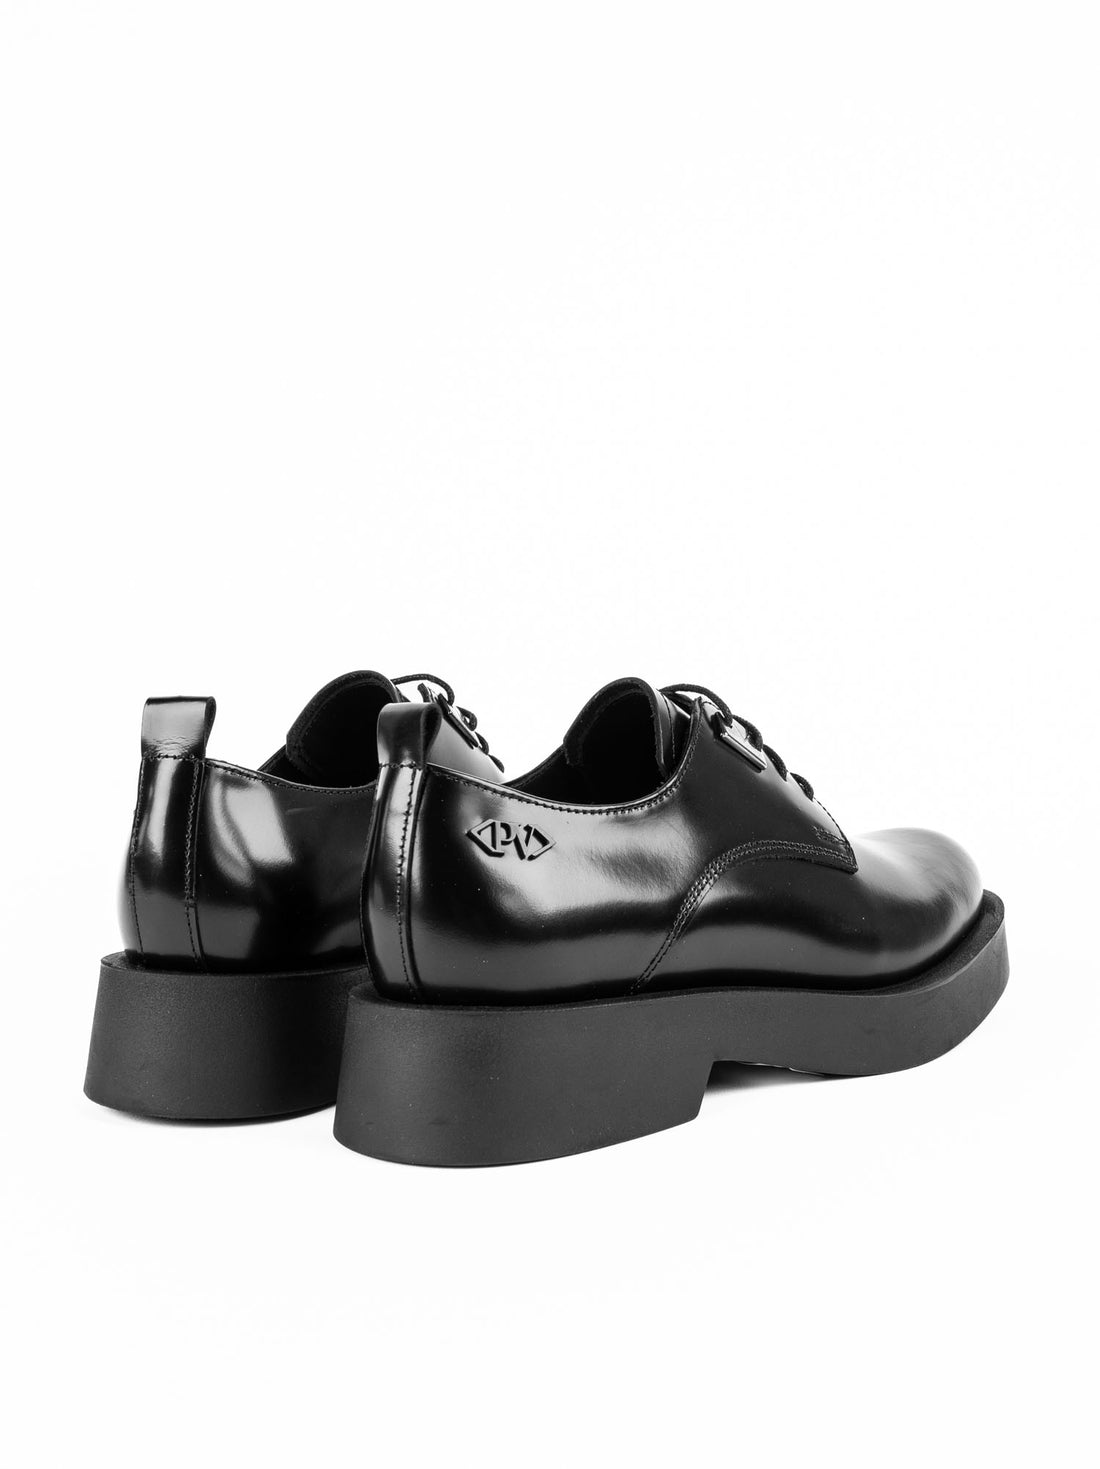 TAG1 BRUSHED LEATHER LACE-UP SHOES